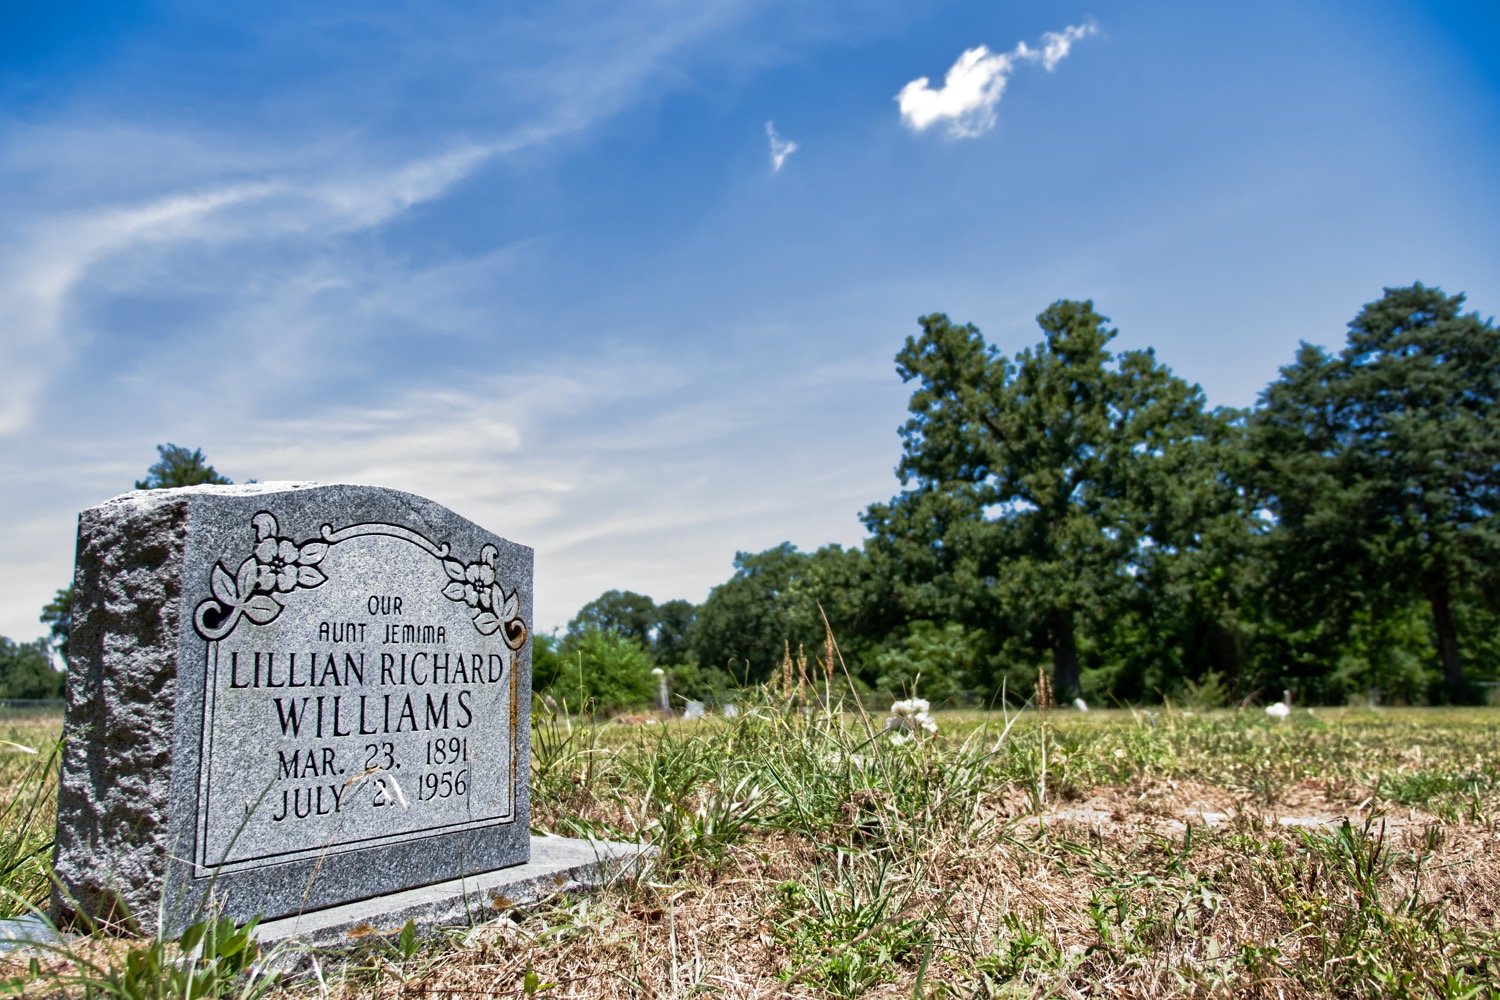 Lillian Richard Williams, who played Aunt Jemima, is buried in the Fouke Cemetery.